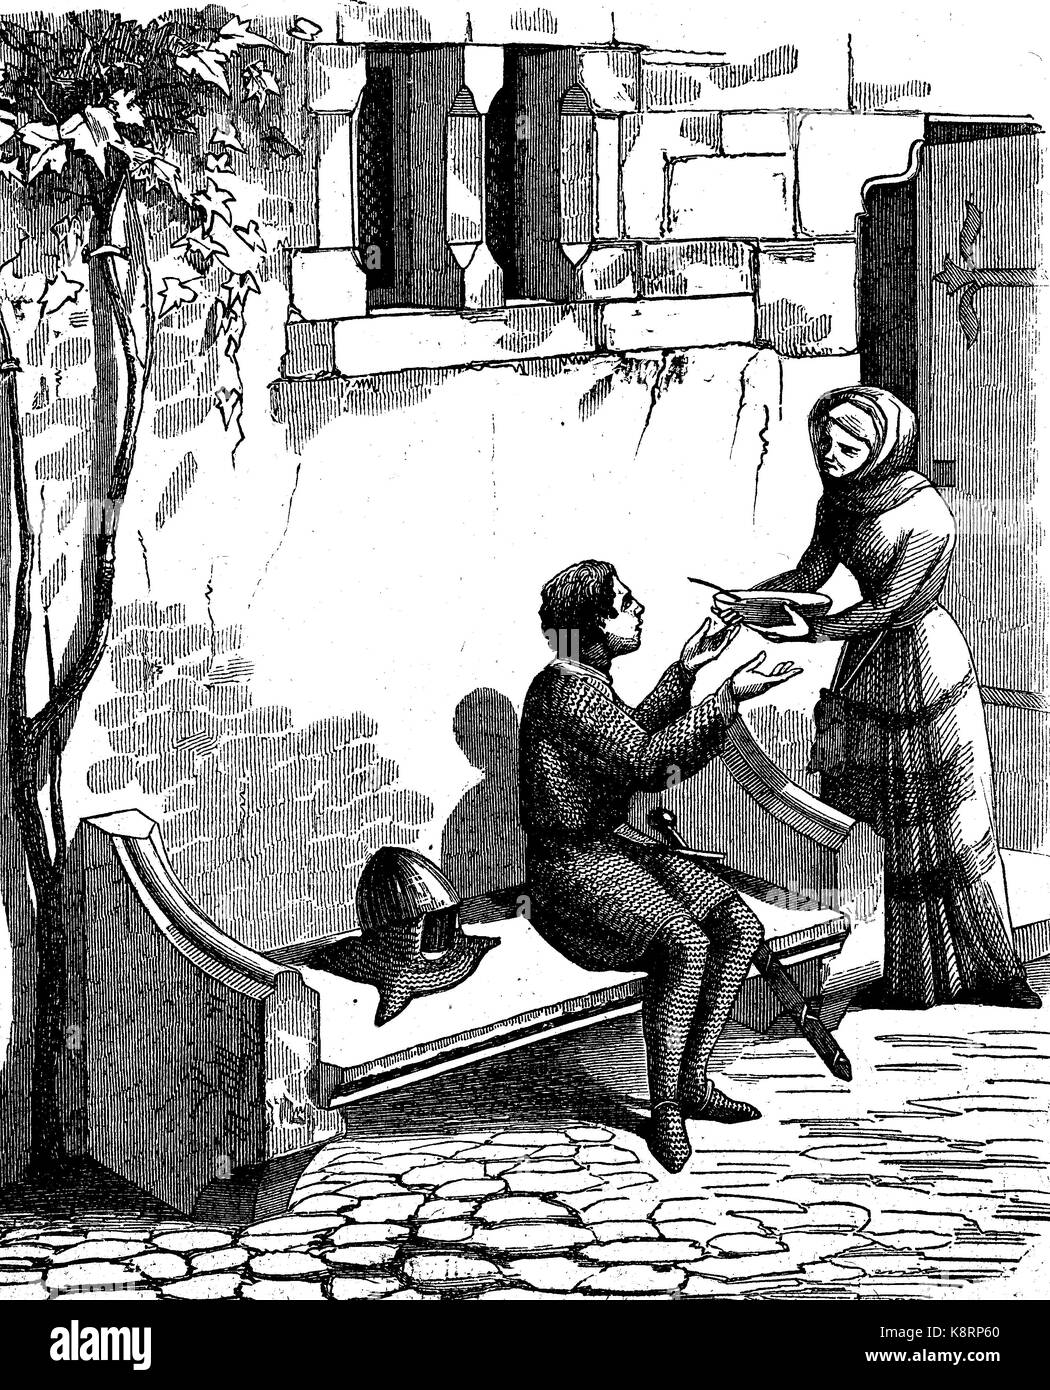 an errant knight in the Middle Ages obtained from a woman a bowl of soup, ein fahrender Rittersmann im Mittelalter erhält von einer Frau einen Teller Suppe, digital improved reproduction of a woodcut, published in the 19th century Stock Photo